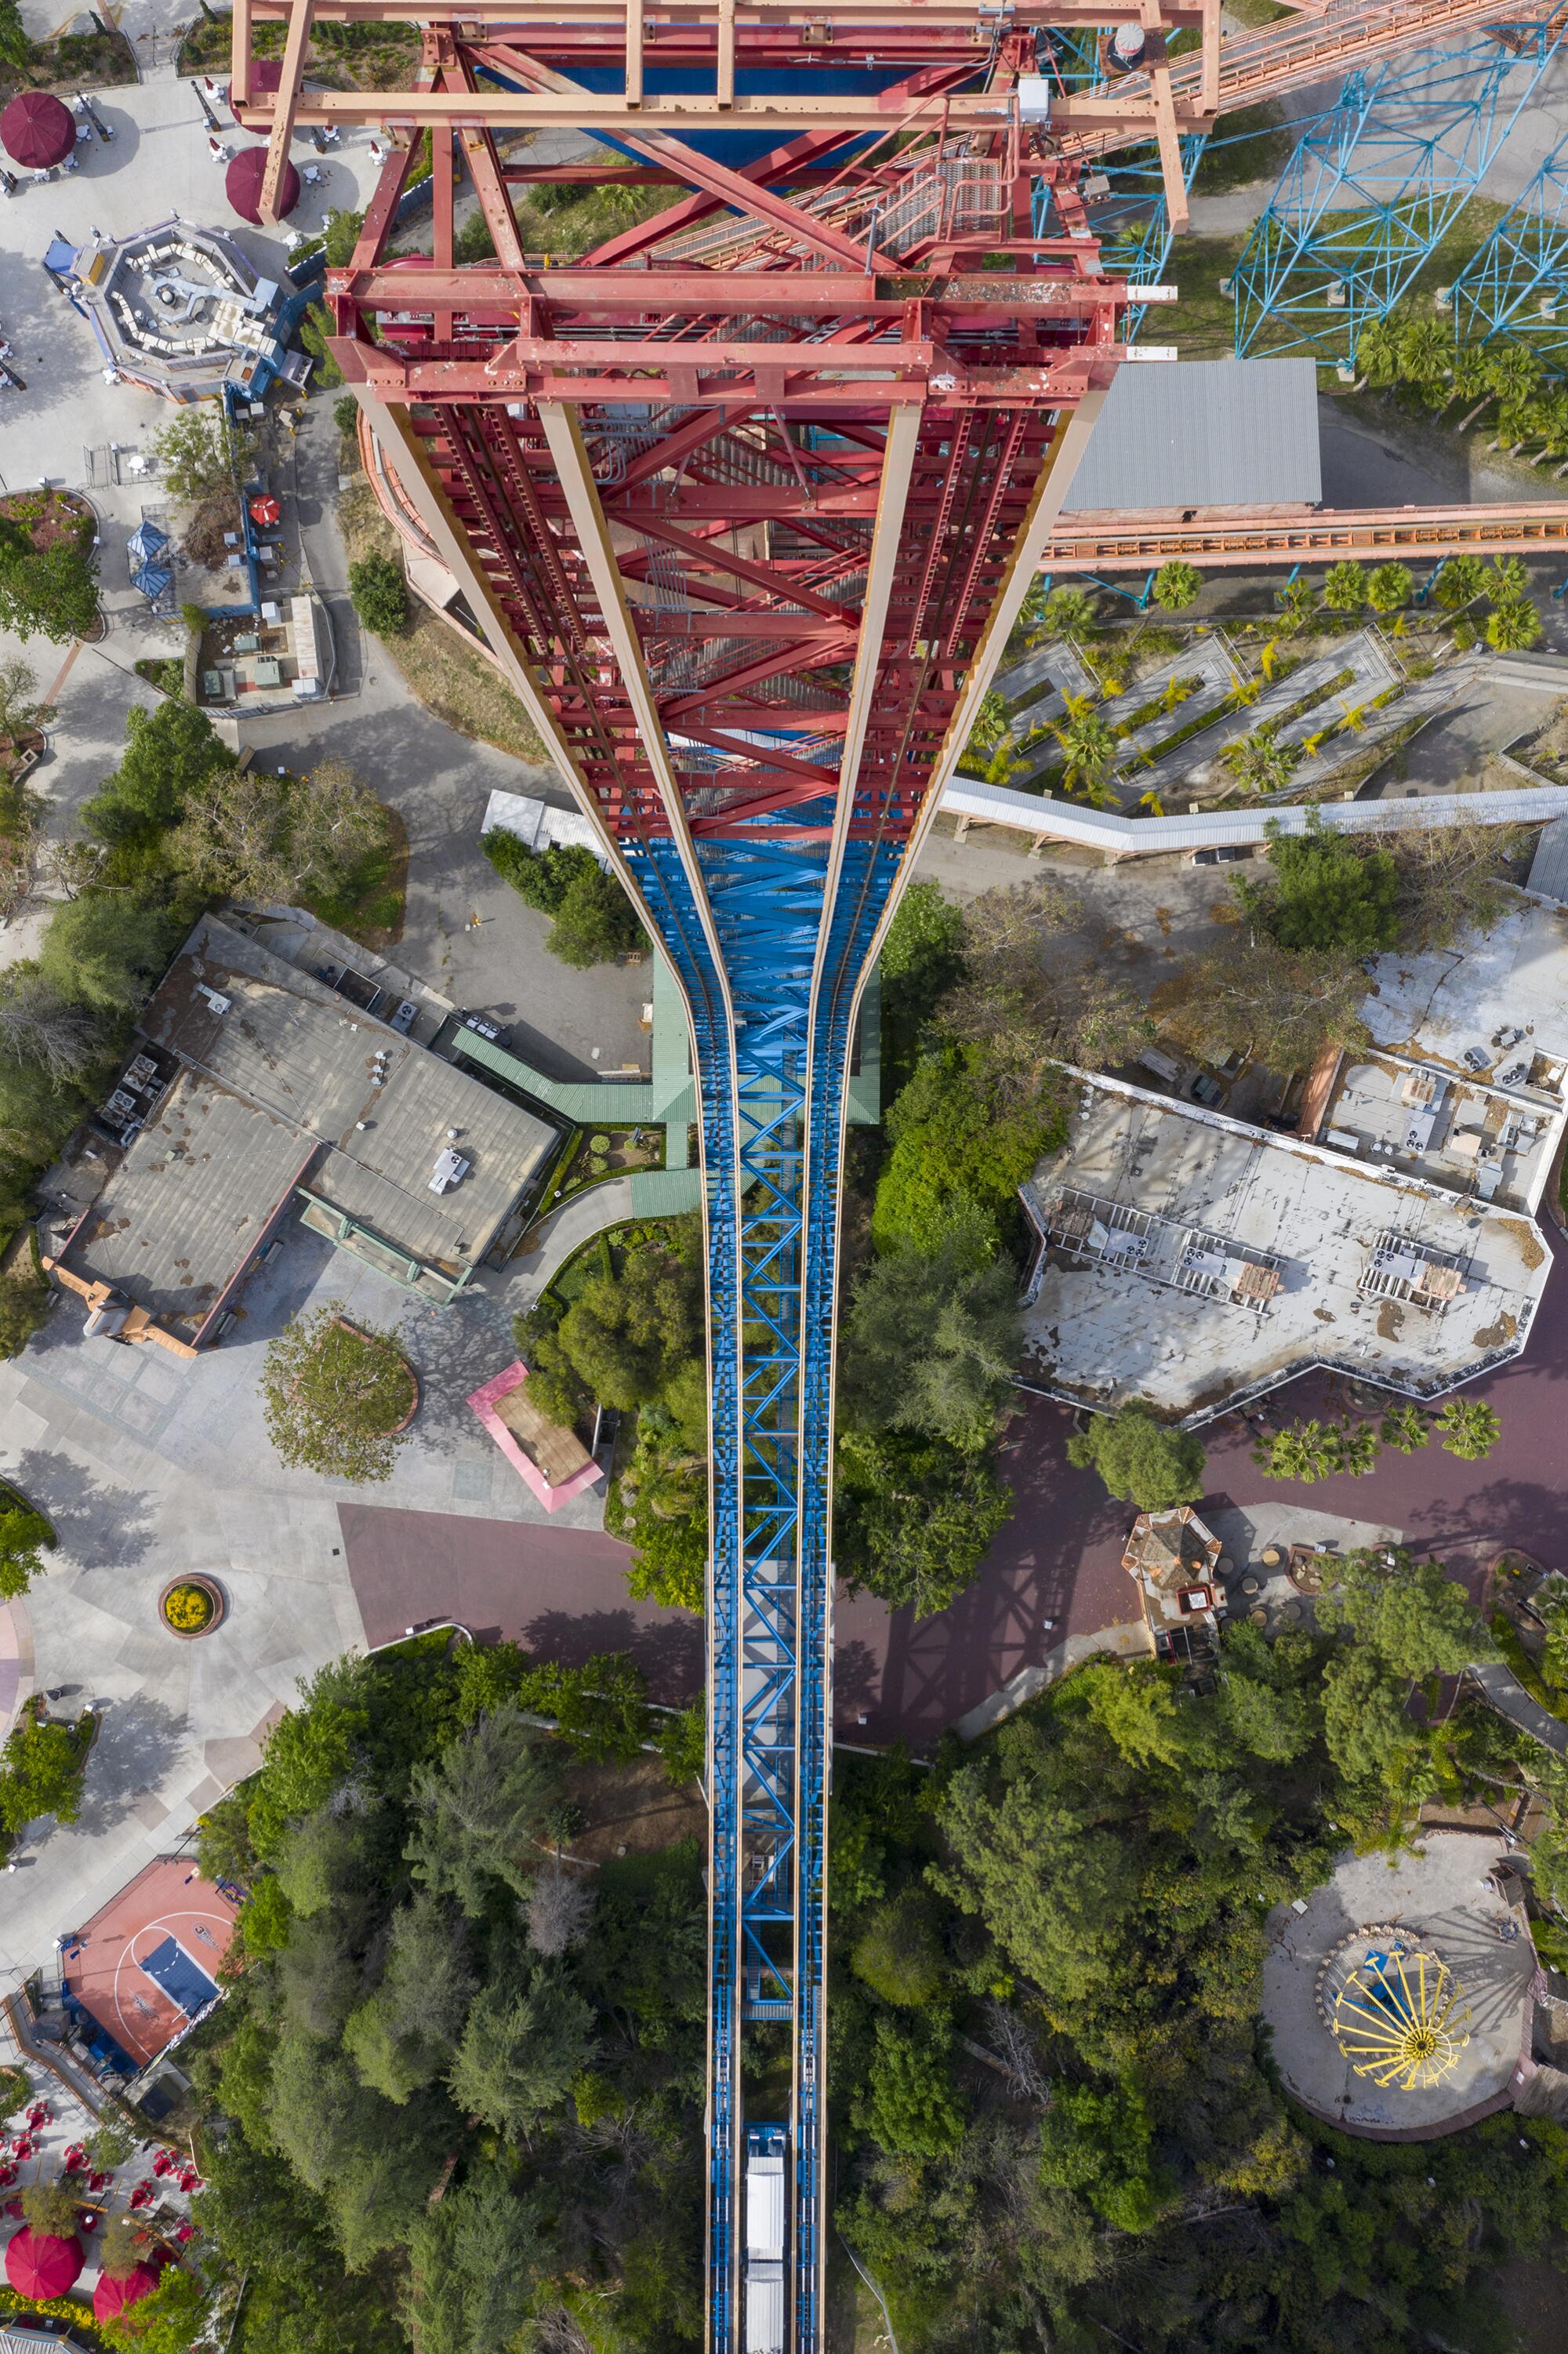 The Superman roller coaster at Six Flags Magic Mountain peaks at 415 feet and reaches a top speed of 104 mph.